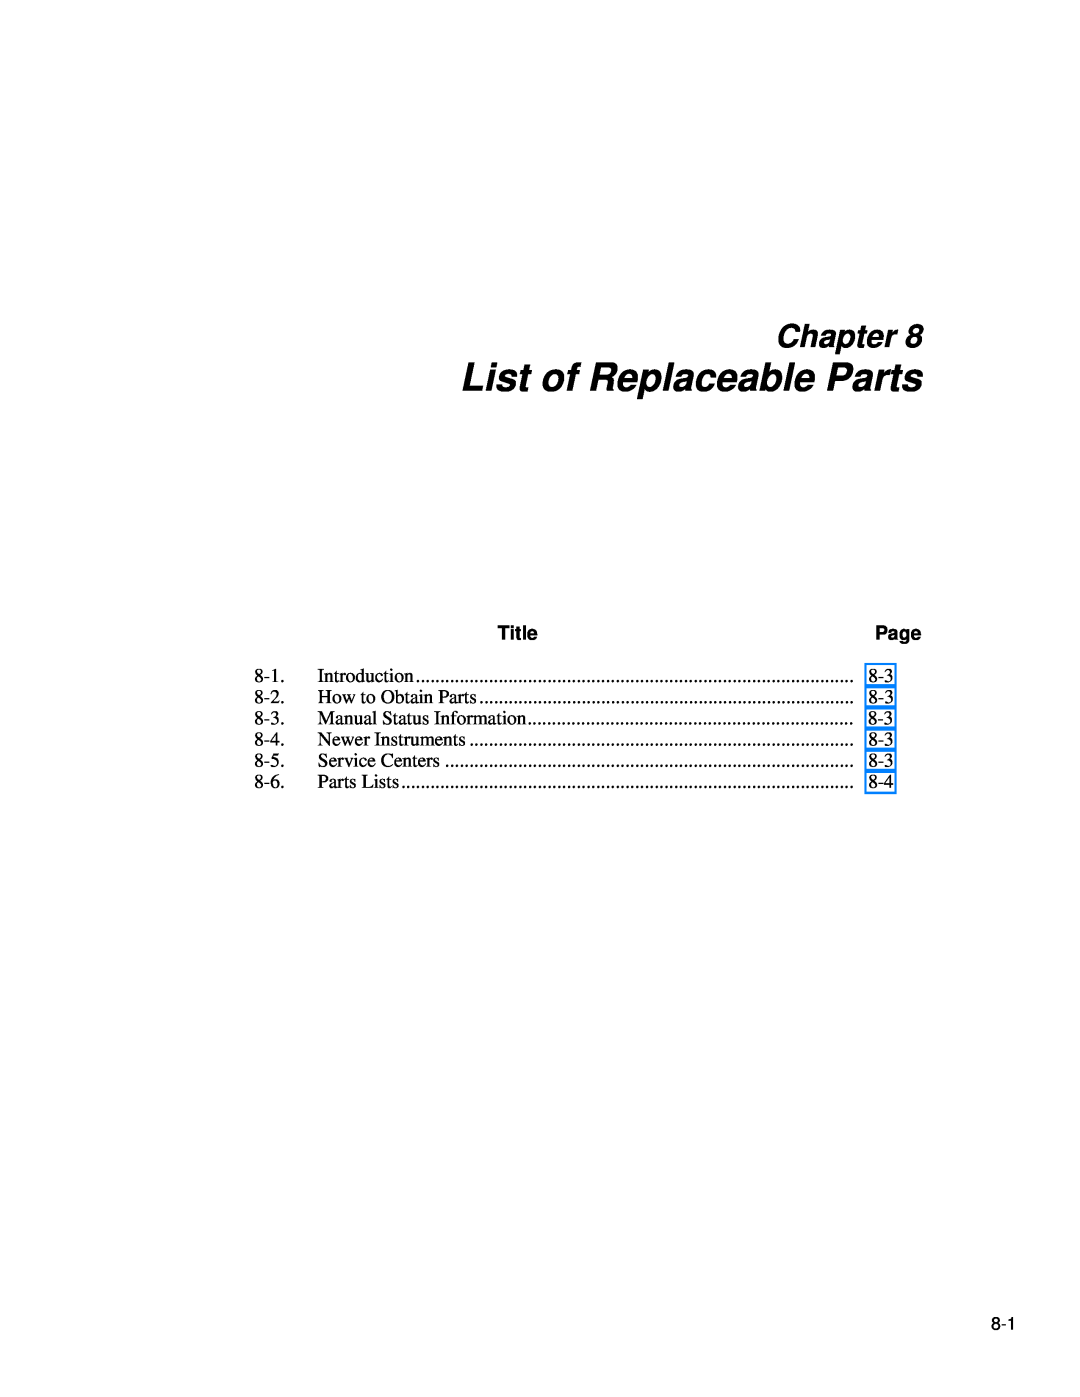 Fluke 5725A instruction manual List of Replaceable Parts, Chapter 